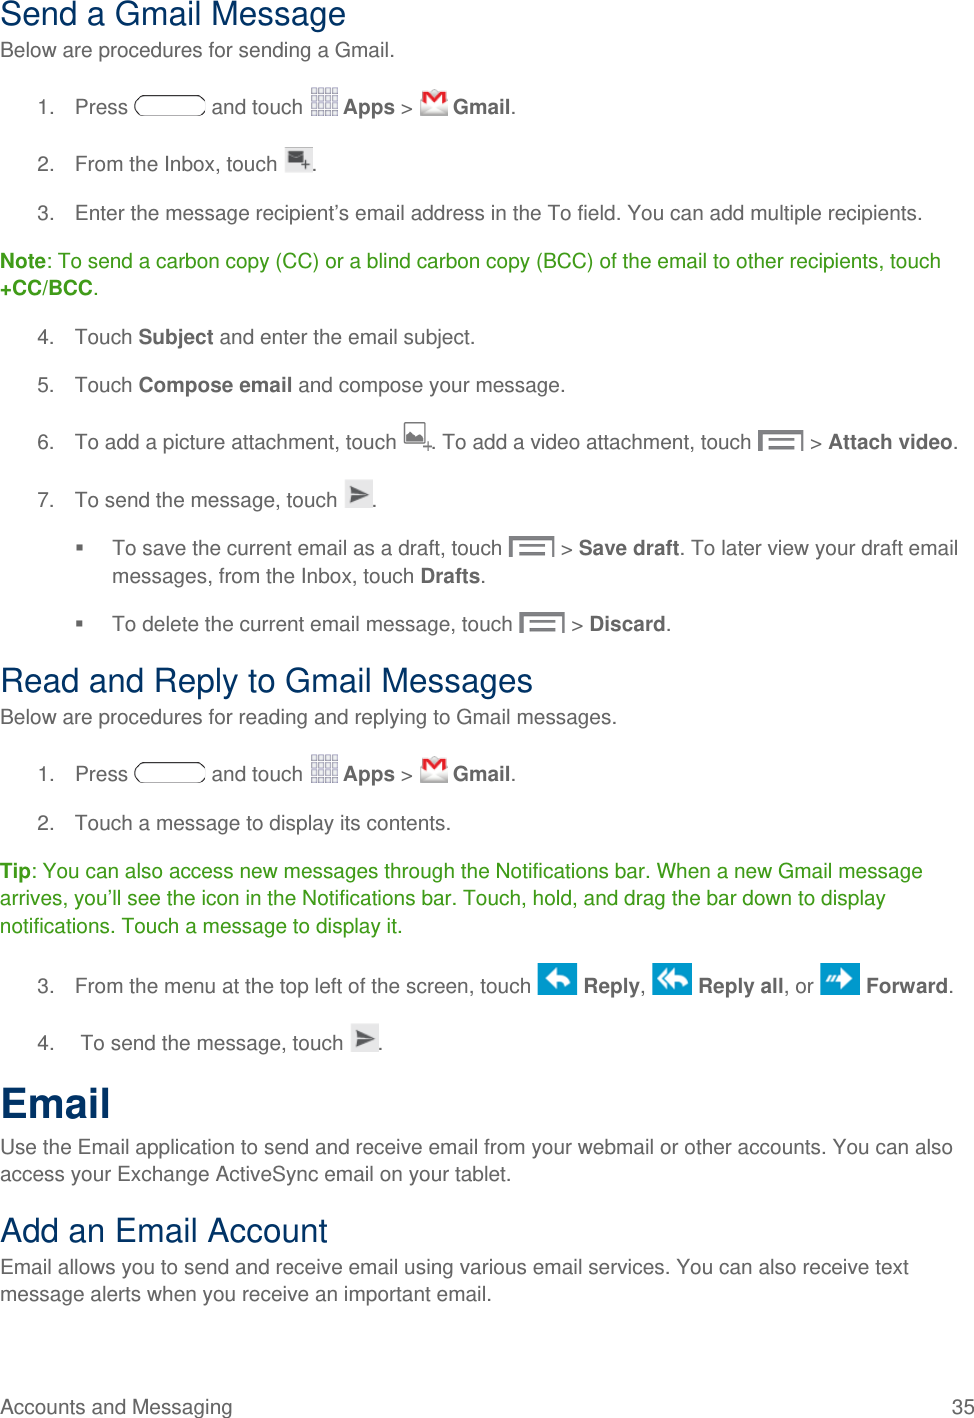 Send a Gmail Message Below are procedures for sending a Gmail. 1. Press   and touch   Apps &gt;   Gmail. 2. From the Inbox, touch  . 3. Enter the message recipient’s email address in the To field. You can add multiple recipients. Note: To send a carbon copy (CC) or a blind carbon copy (BCC) of the email to other recipients, touch +CC/BCC. 4. Touch Subject and enter the email subject. 5. Touch Compose email and compose your message.  6. To add a picture attachment, touch . To add a video attachment, touch   &gt; Attach video. 7. To send the message, touch  .  To save the current email as a draft, touch  &gt; Save draft. To later view your draft email messages, from the Inbox, touch Drafts.  To delete the current email message, touch  &gt; Discard. Read and Reply to Gmail Messages Below are procedures for reading and replying to Gmail messages. 1. Press   and touch   Apps &gt;   Gmail. 2. Touch a message to display its contents. Tip: You can also access new messages through the Notifications bar. When a new Gmail message arrives, you’ll see the icon in the Notifications bar. Touch, hold, and drag the bar down to display notifications. Touch a message to display it.  3. From the menu at the top left of the screen, touch   Reply,   Reply all, or   Forward. 4.   To send the message, touch  . Email Use the Email application to send and receive email from your webmail or other accounts. You can also access your Exchange ActiveSync email on your tablet. Add an Email Account Email allows you to send and receive email using various email services. You can also receive text message alerts when you receive an important email. Accounts and Messaging 35   